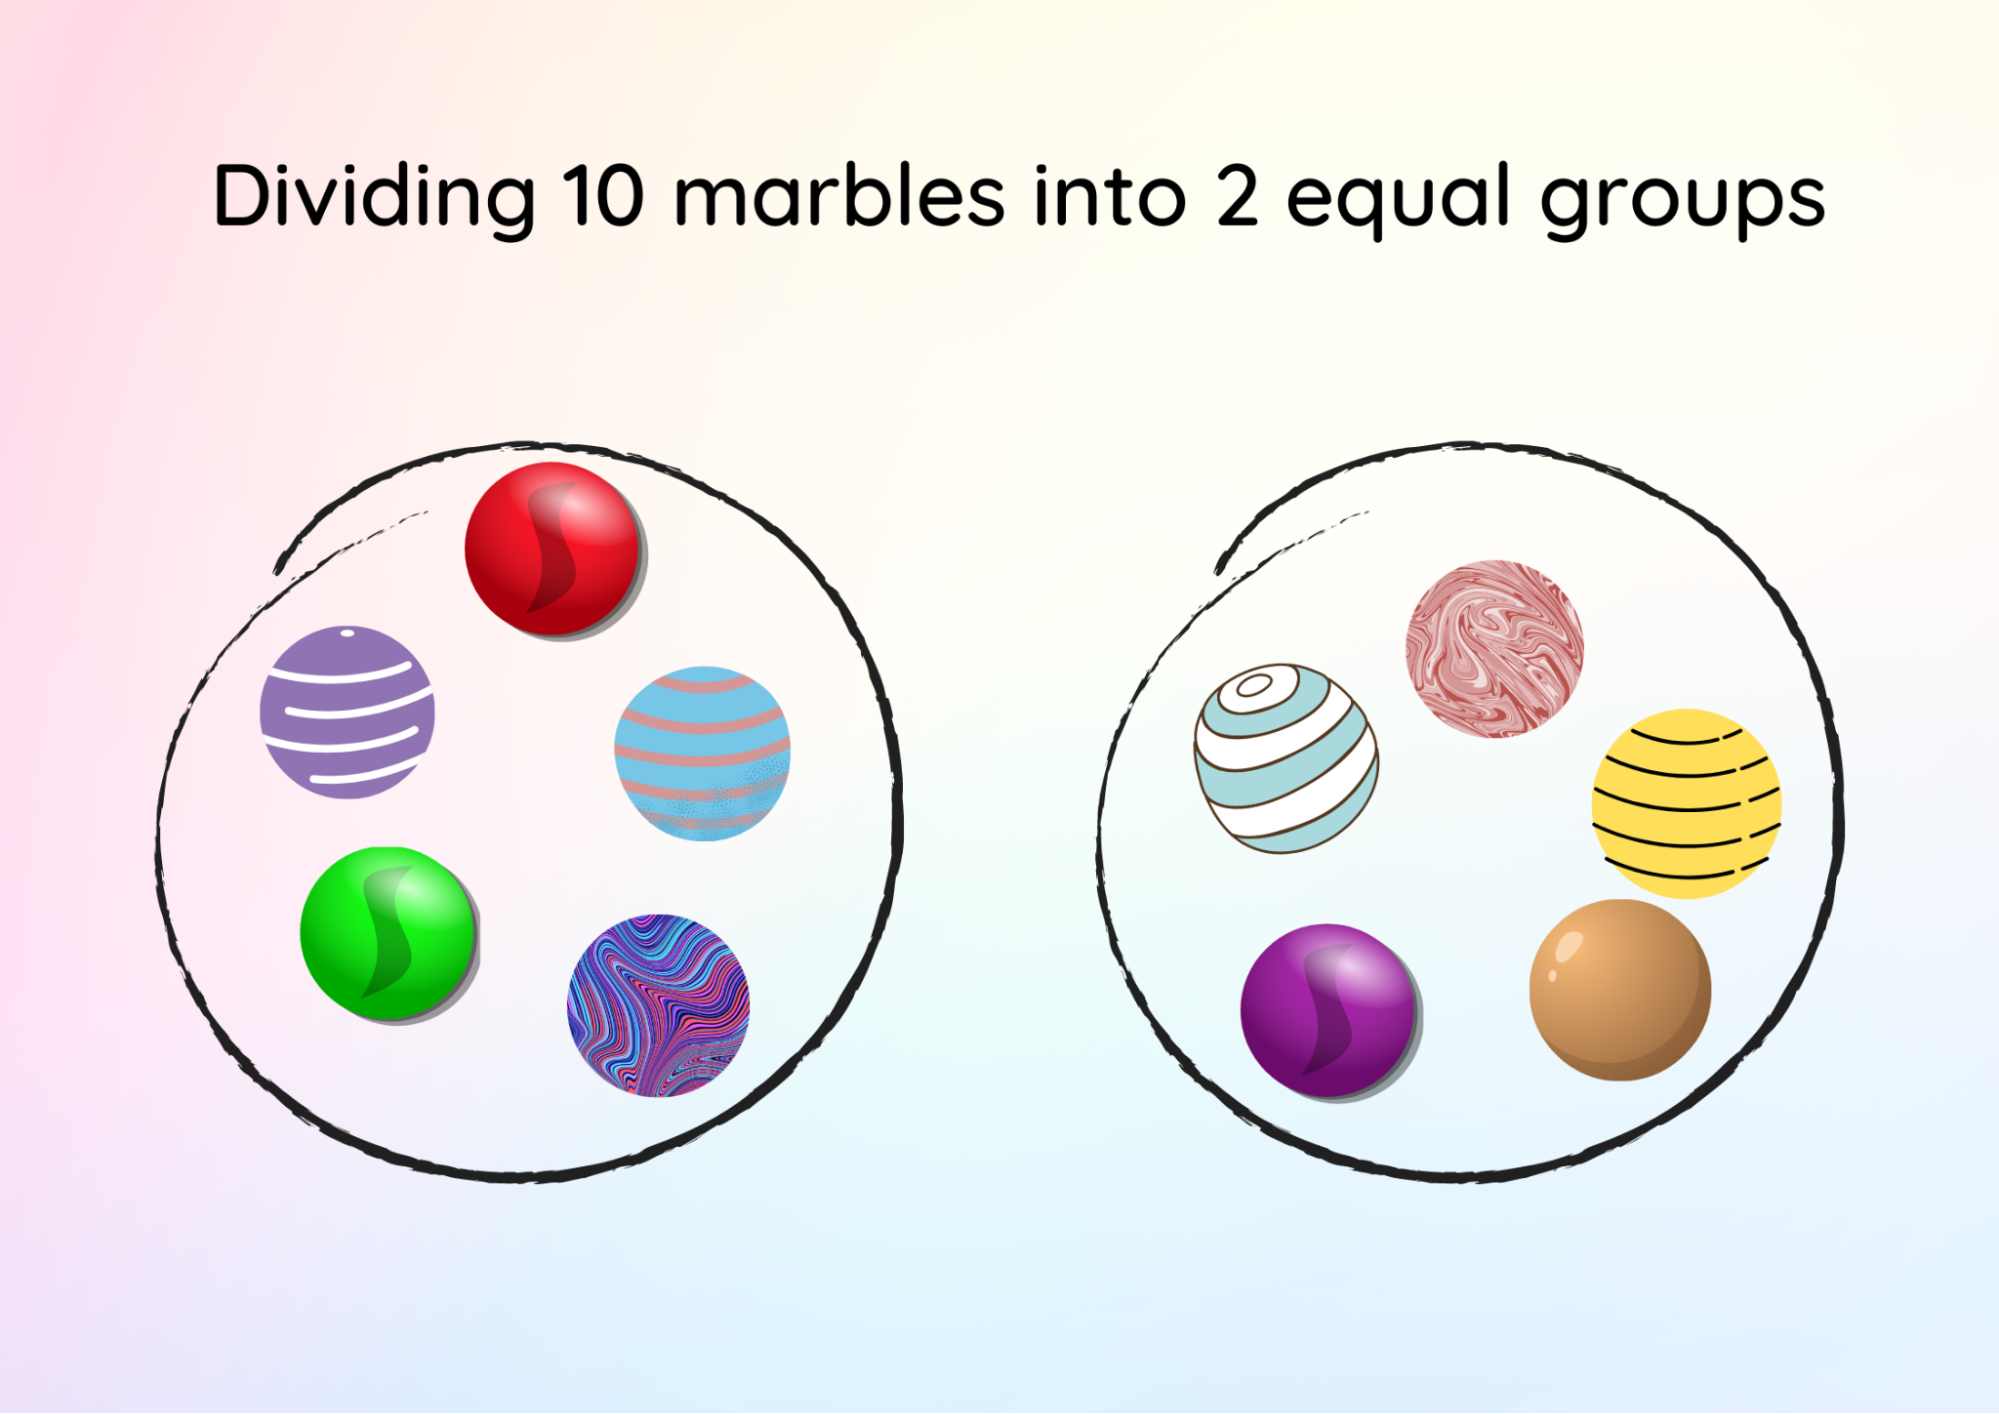 Image Shows 10 Objects Which are Equally Divided Into 2 Groups Each of 5 Objects